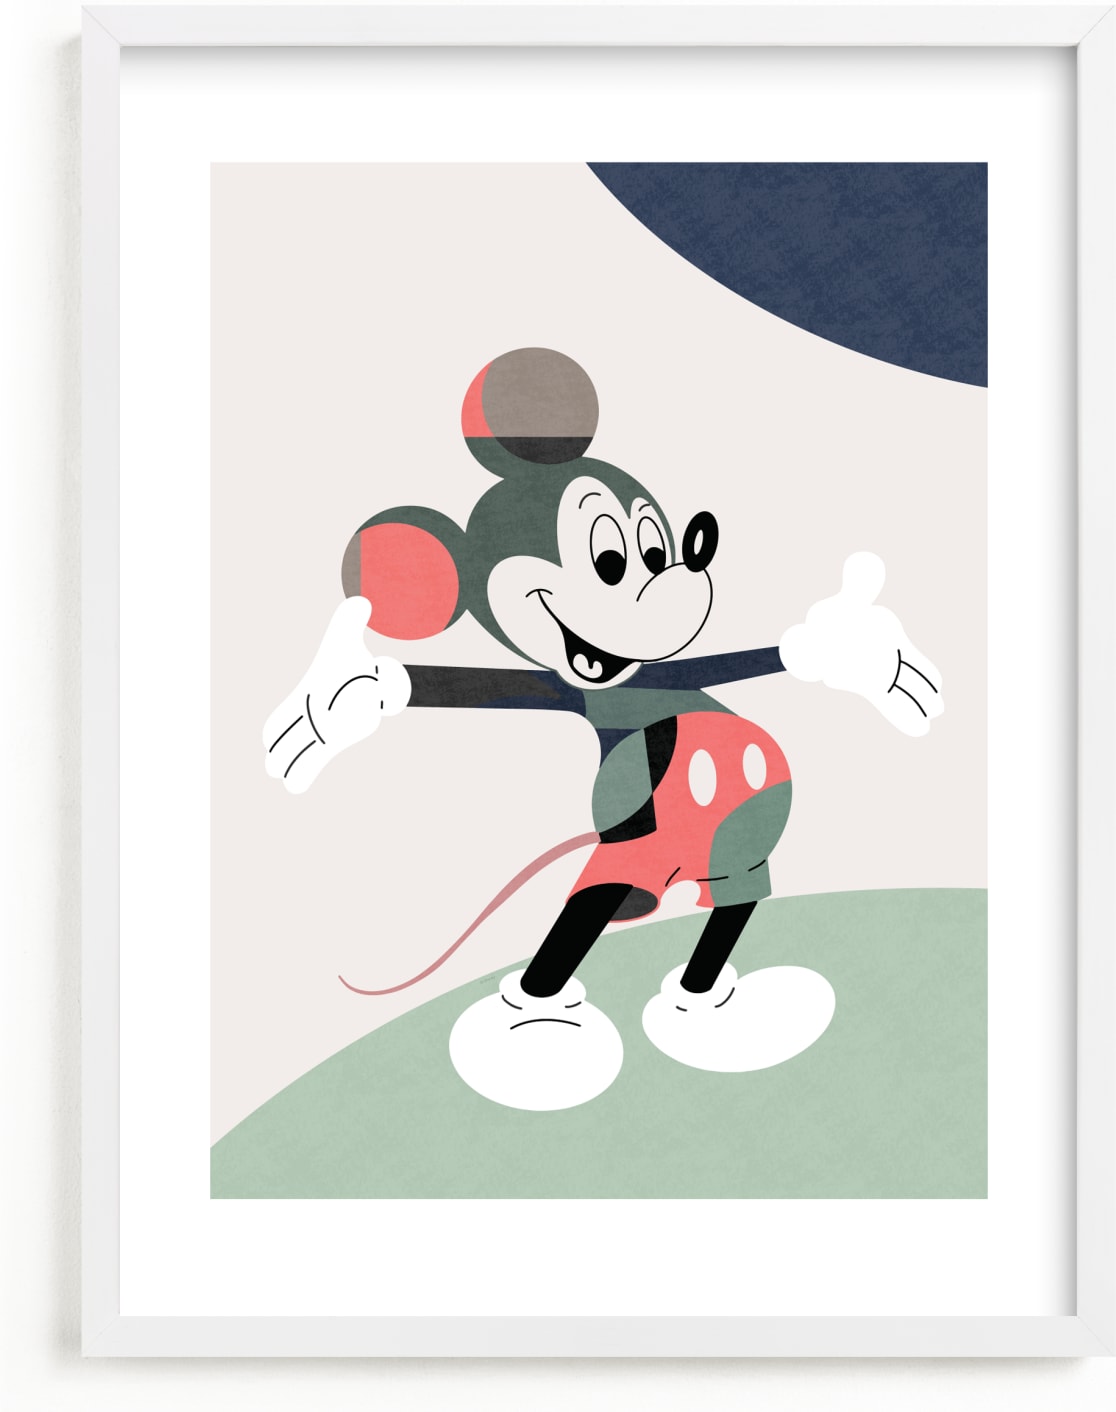 This is a blue disney art by Maja Cunningham called The One and Only Disney Mickey Mouse.